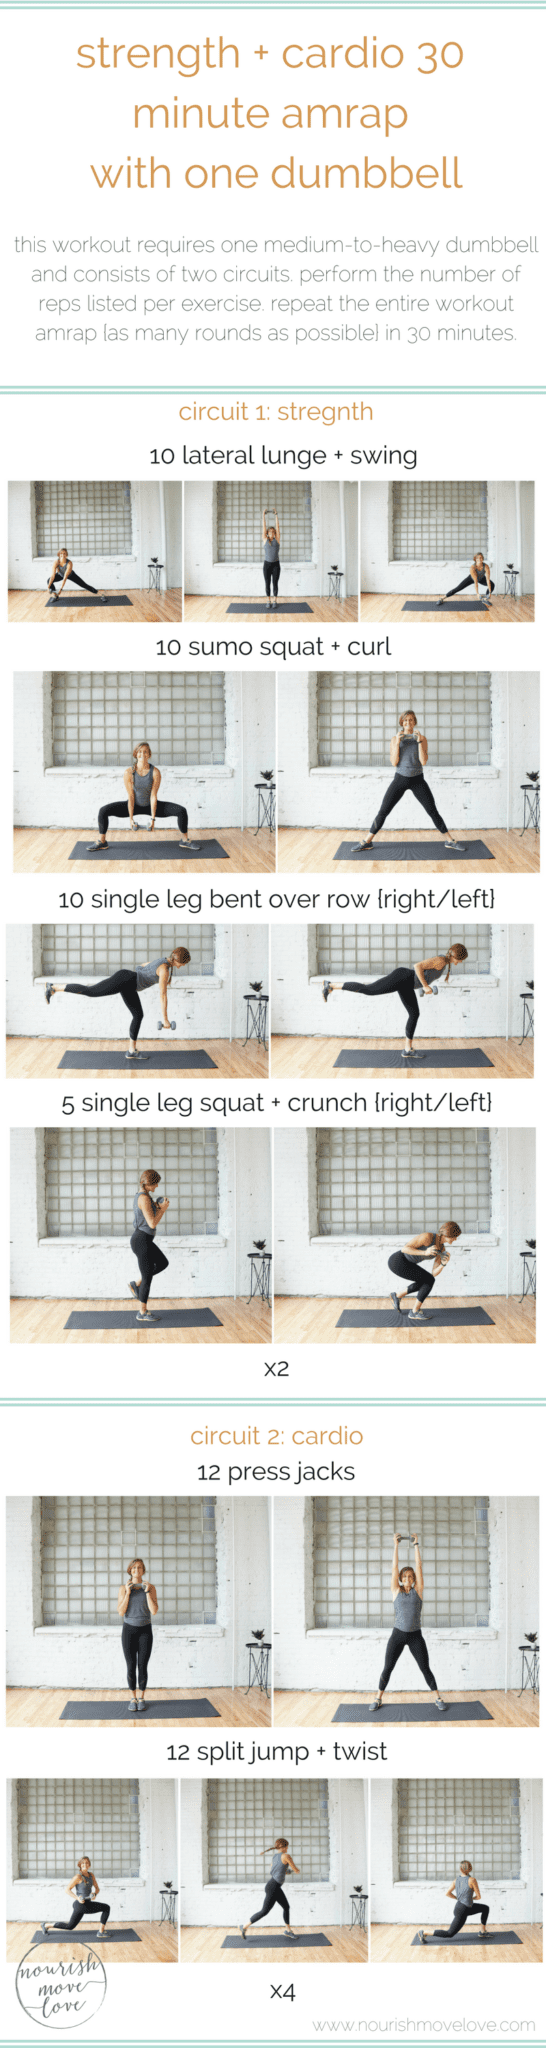 strength + cardio 30 minute amrap workout with one dumbbell | www.nourishmovelove.com